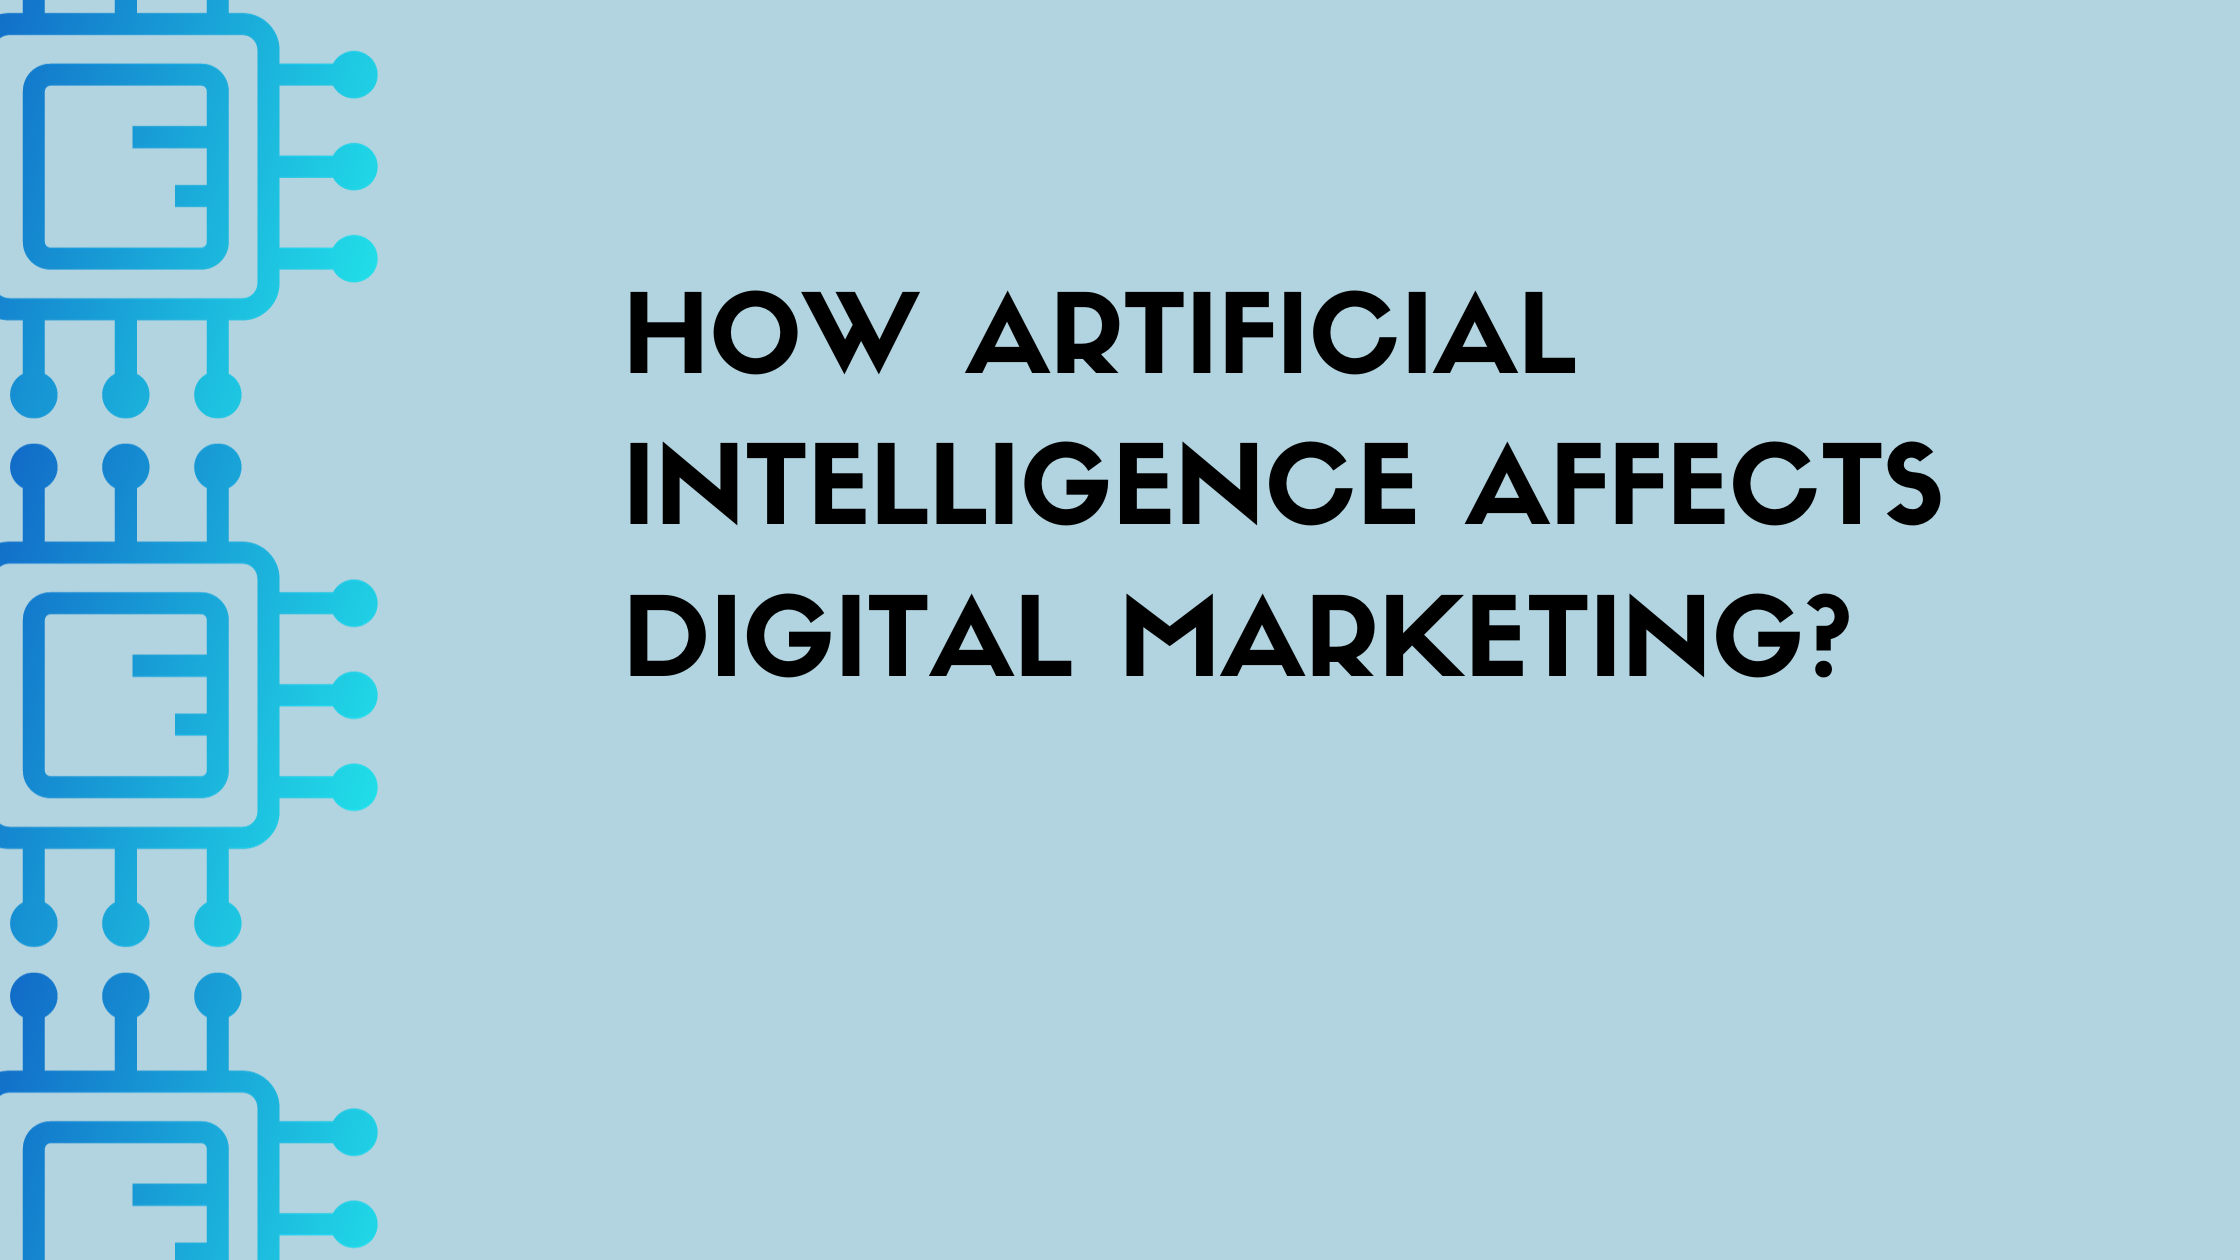 How artificial intelligence affects digital marketing